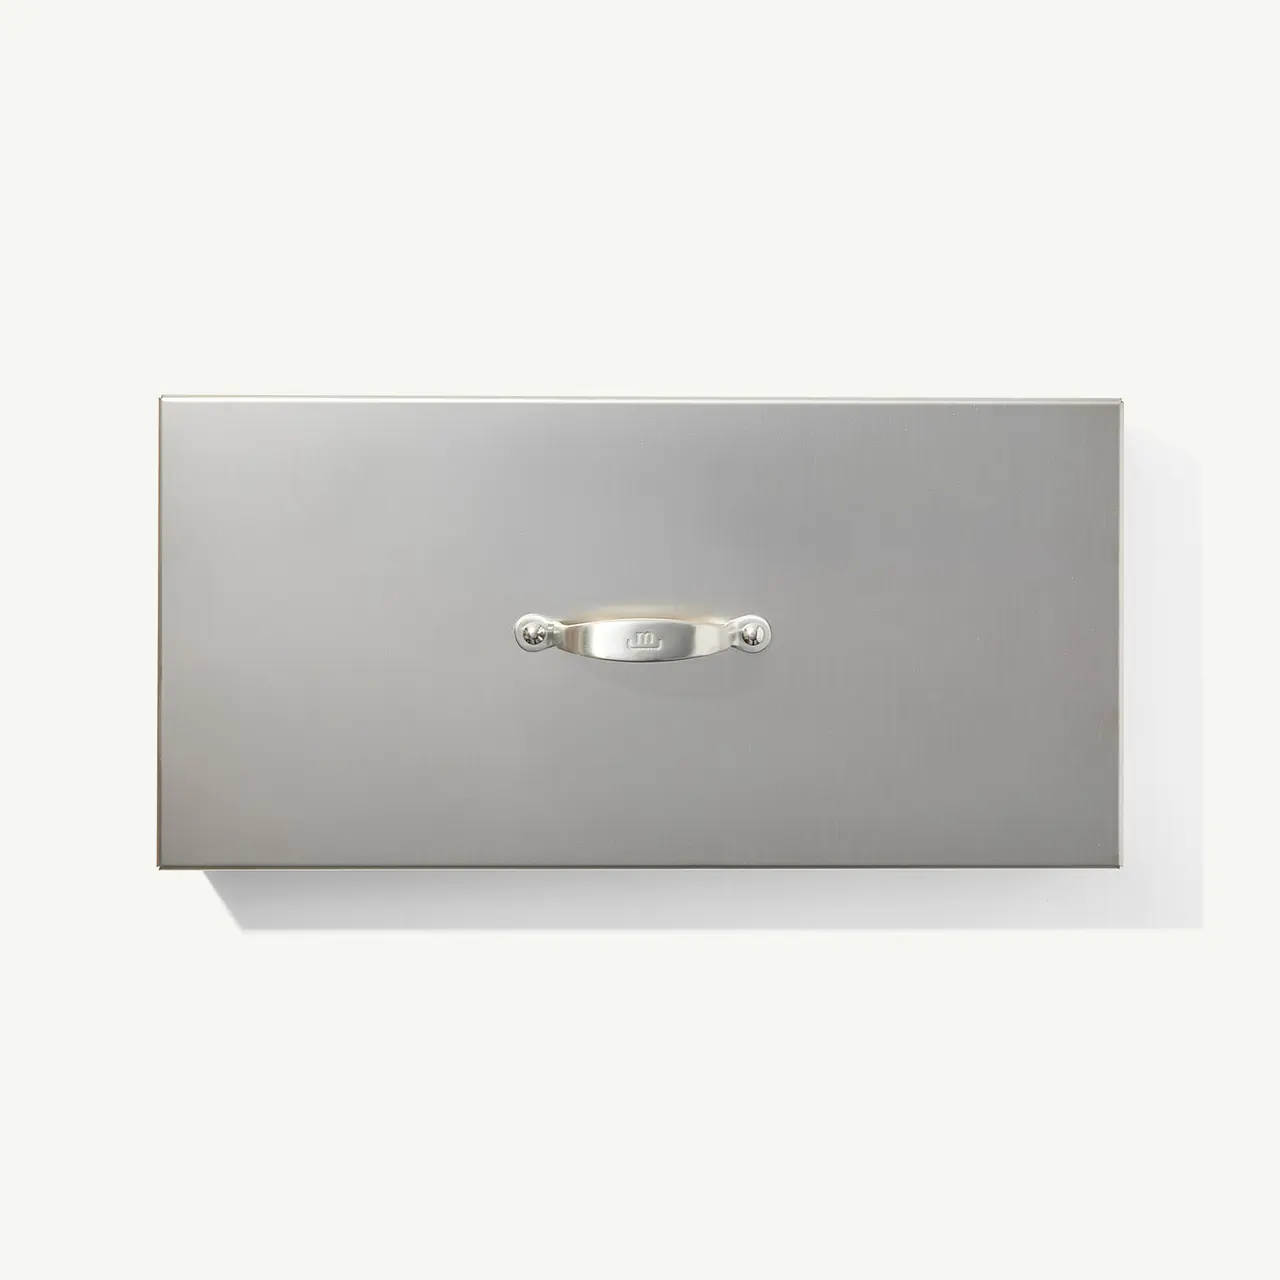 A silver drawer front is shown against a white background with a simple metal handle attached to its center.